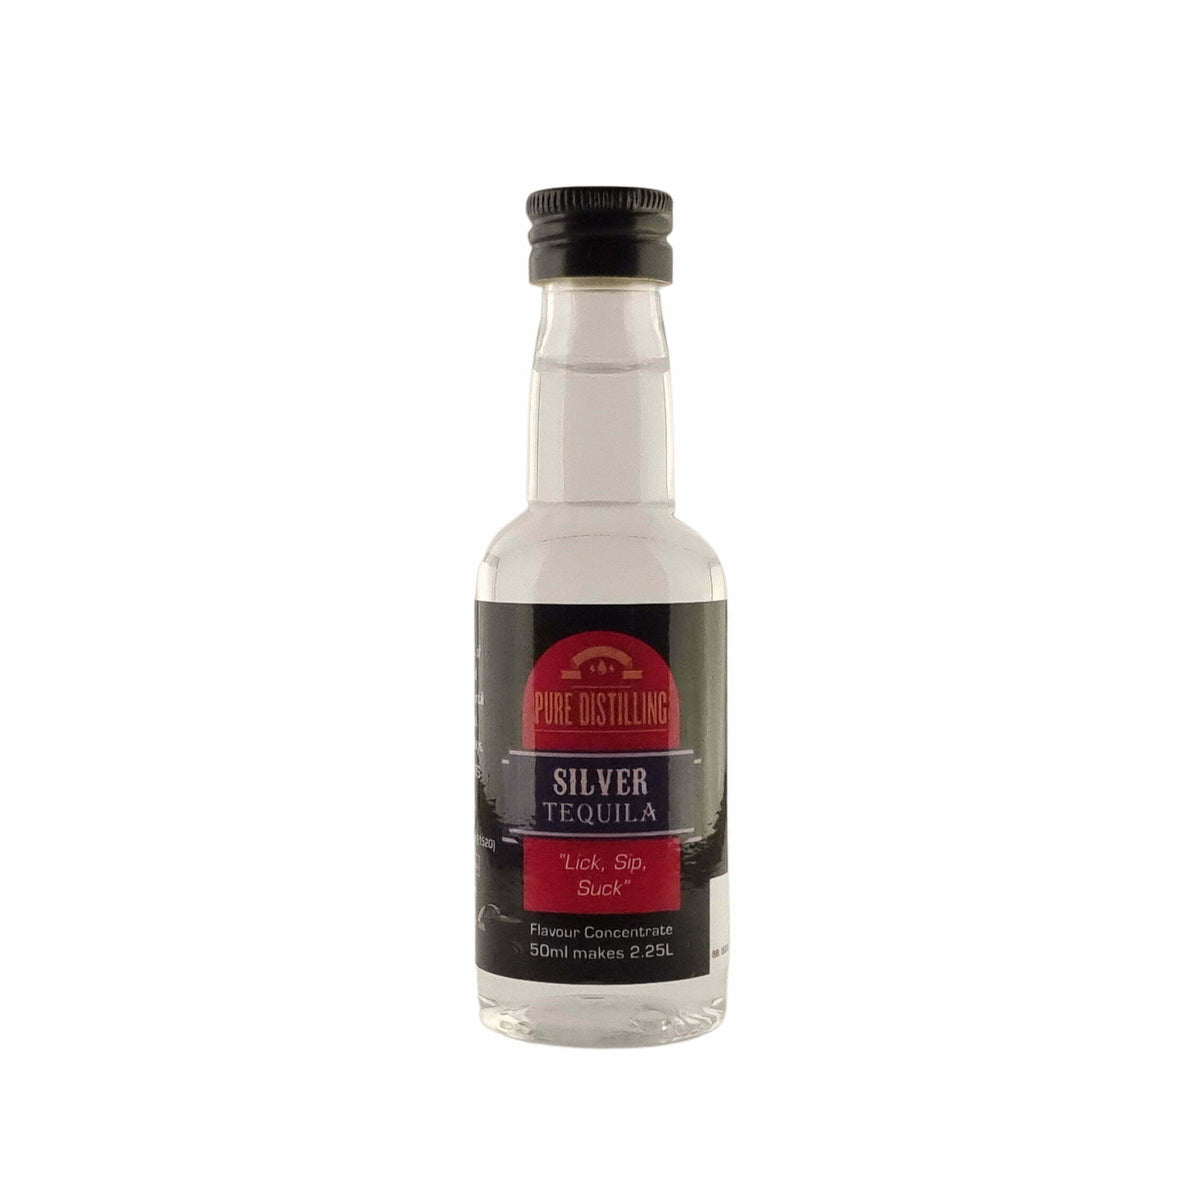 Pure Distilling Silver Tequila Flavour